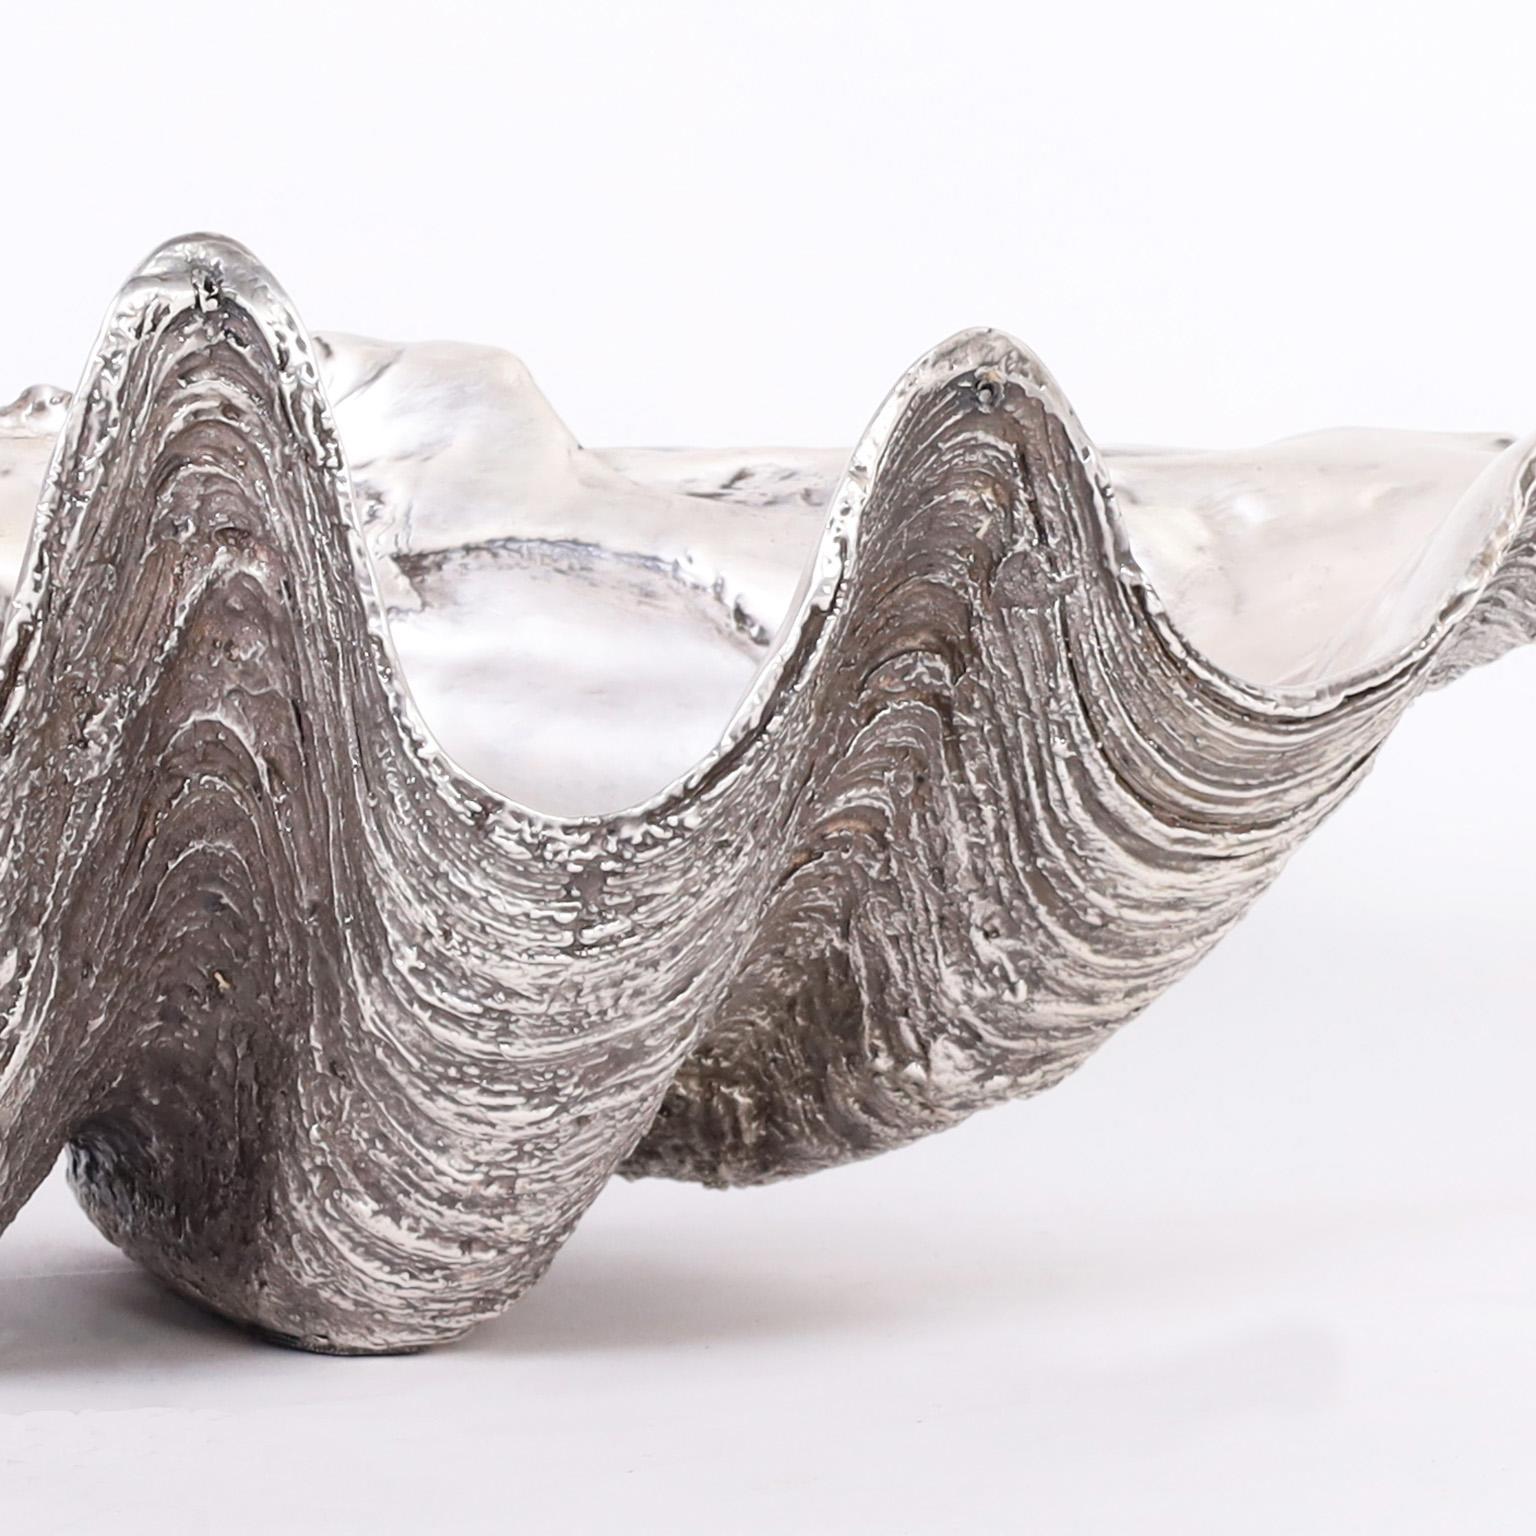 Silver Plate Life Size Giant Clam Shell Sculpture For Sale 4